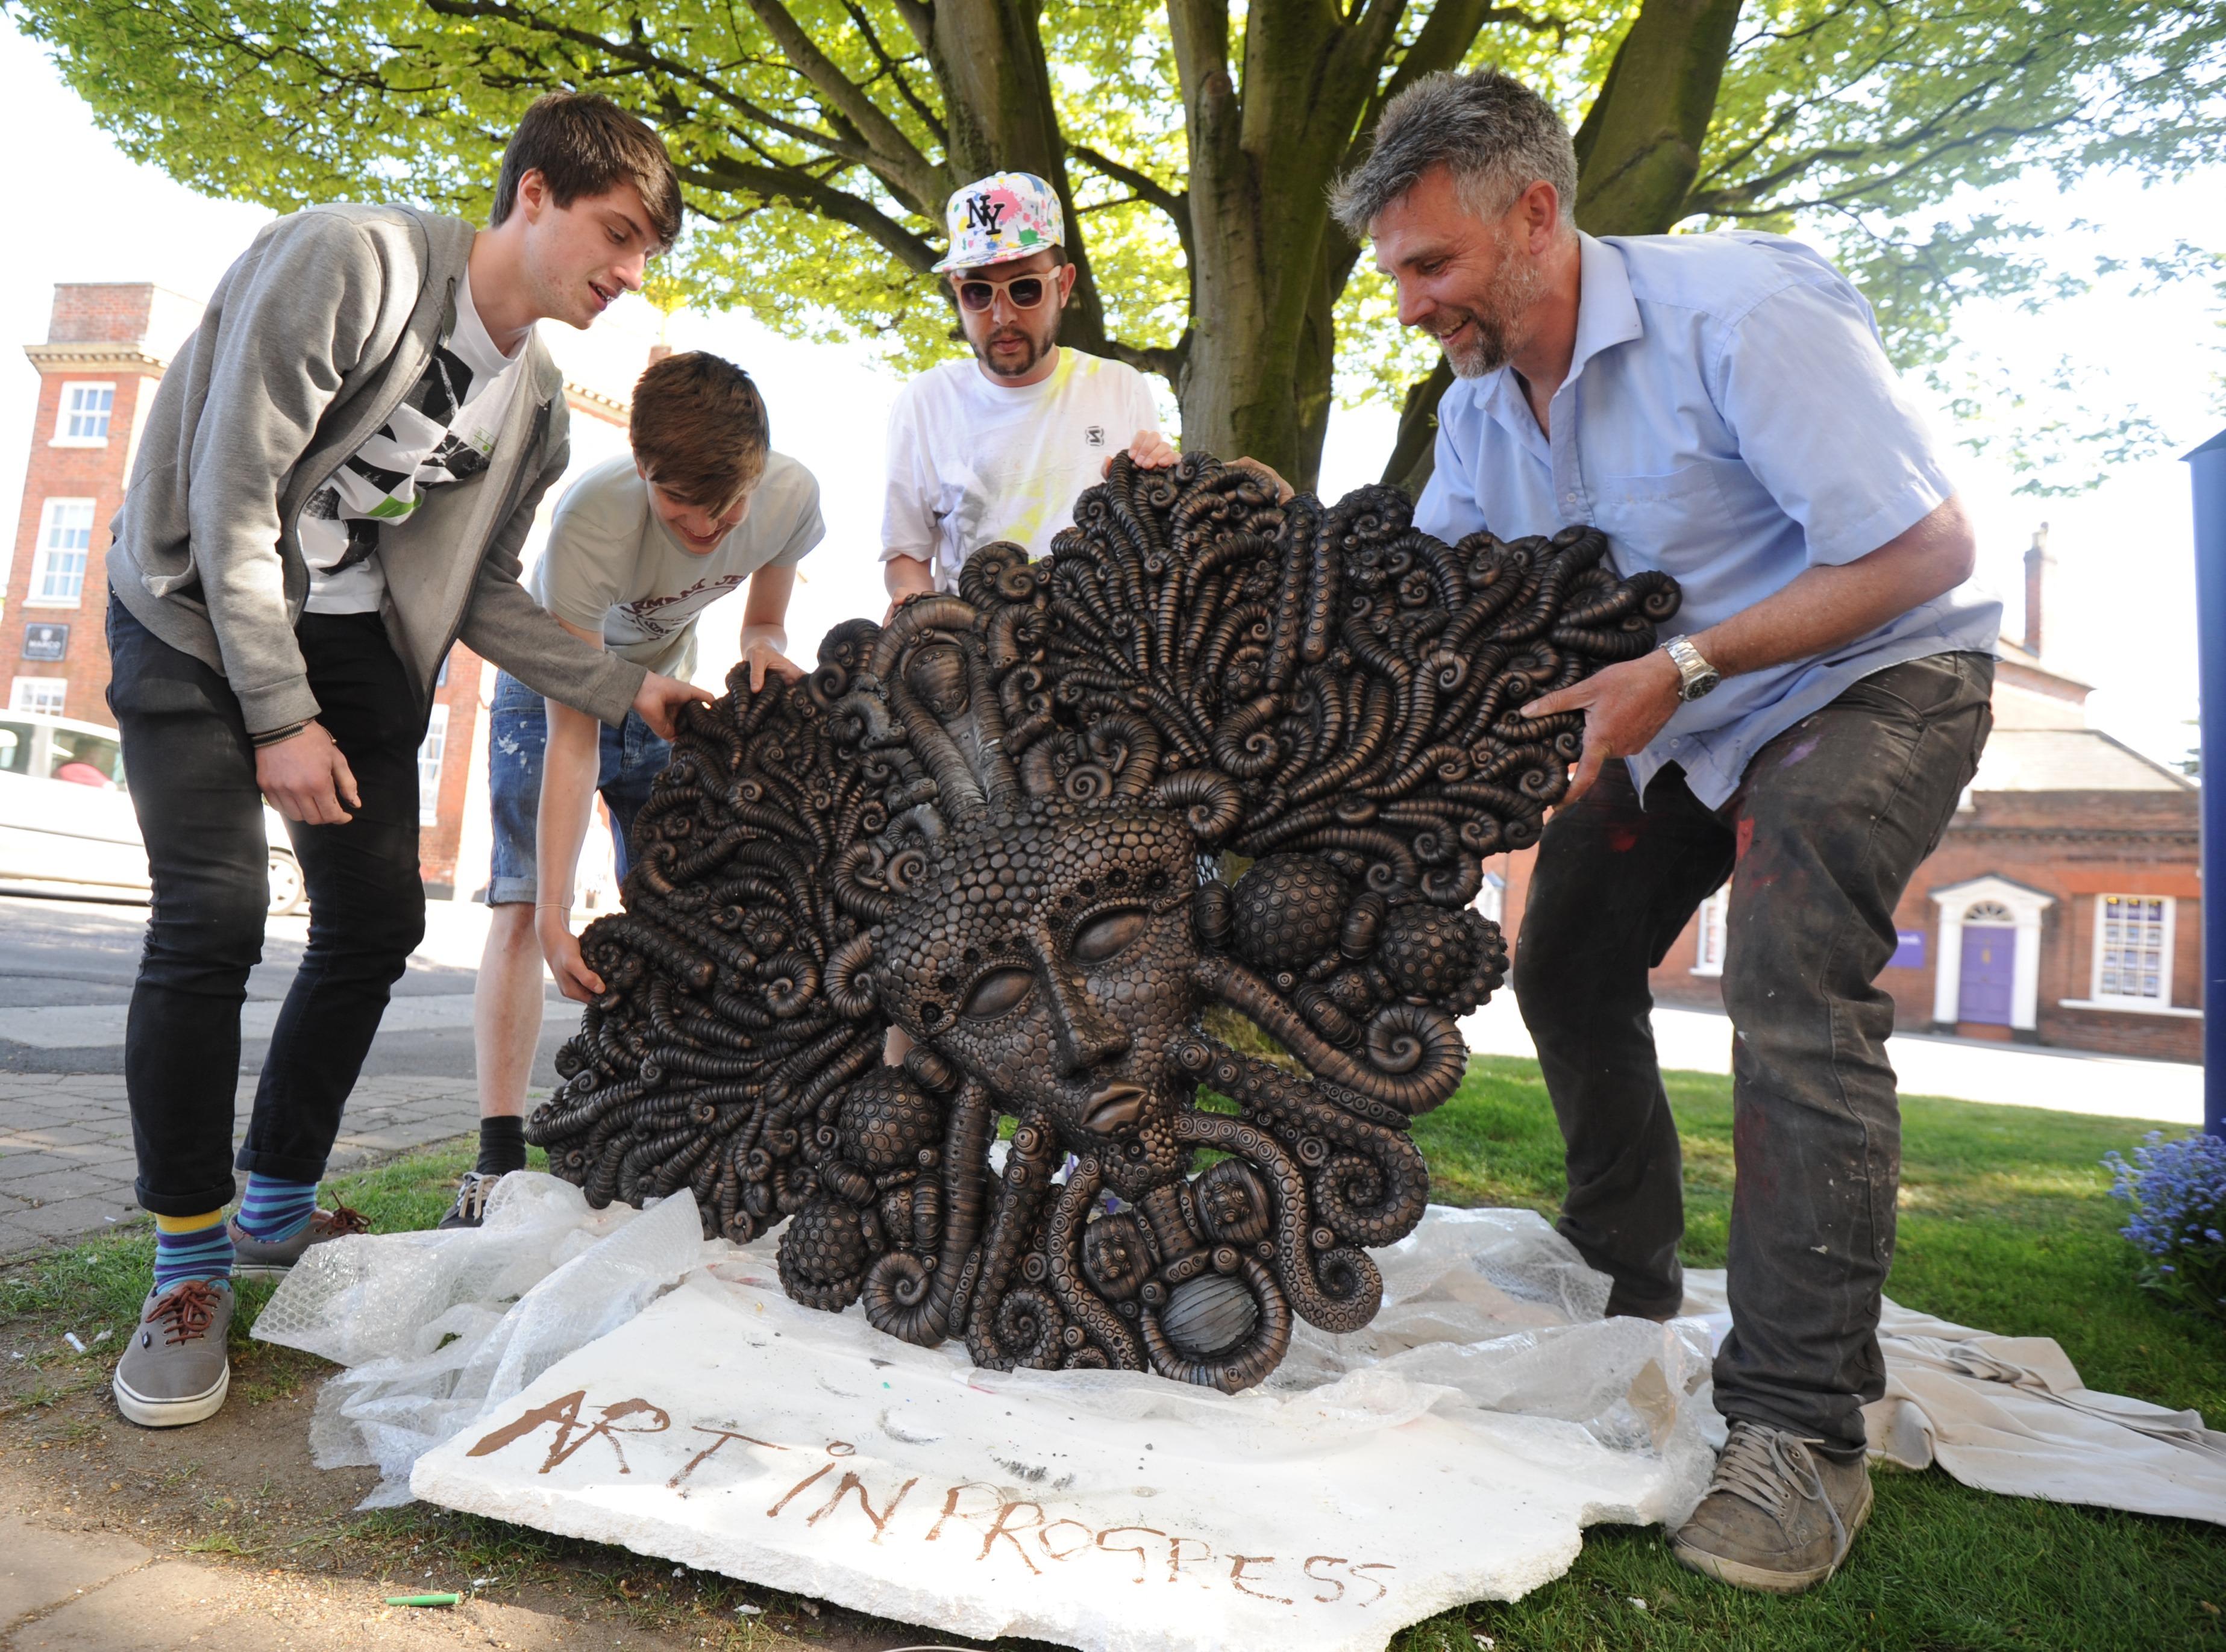 Cityzen Kane (right) ready to install his "HEX" sculpture in the City.

Picture by Louise Adams C130629-13 Ent Street Art ENGSUS00120130705105228